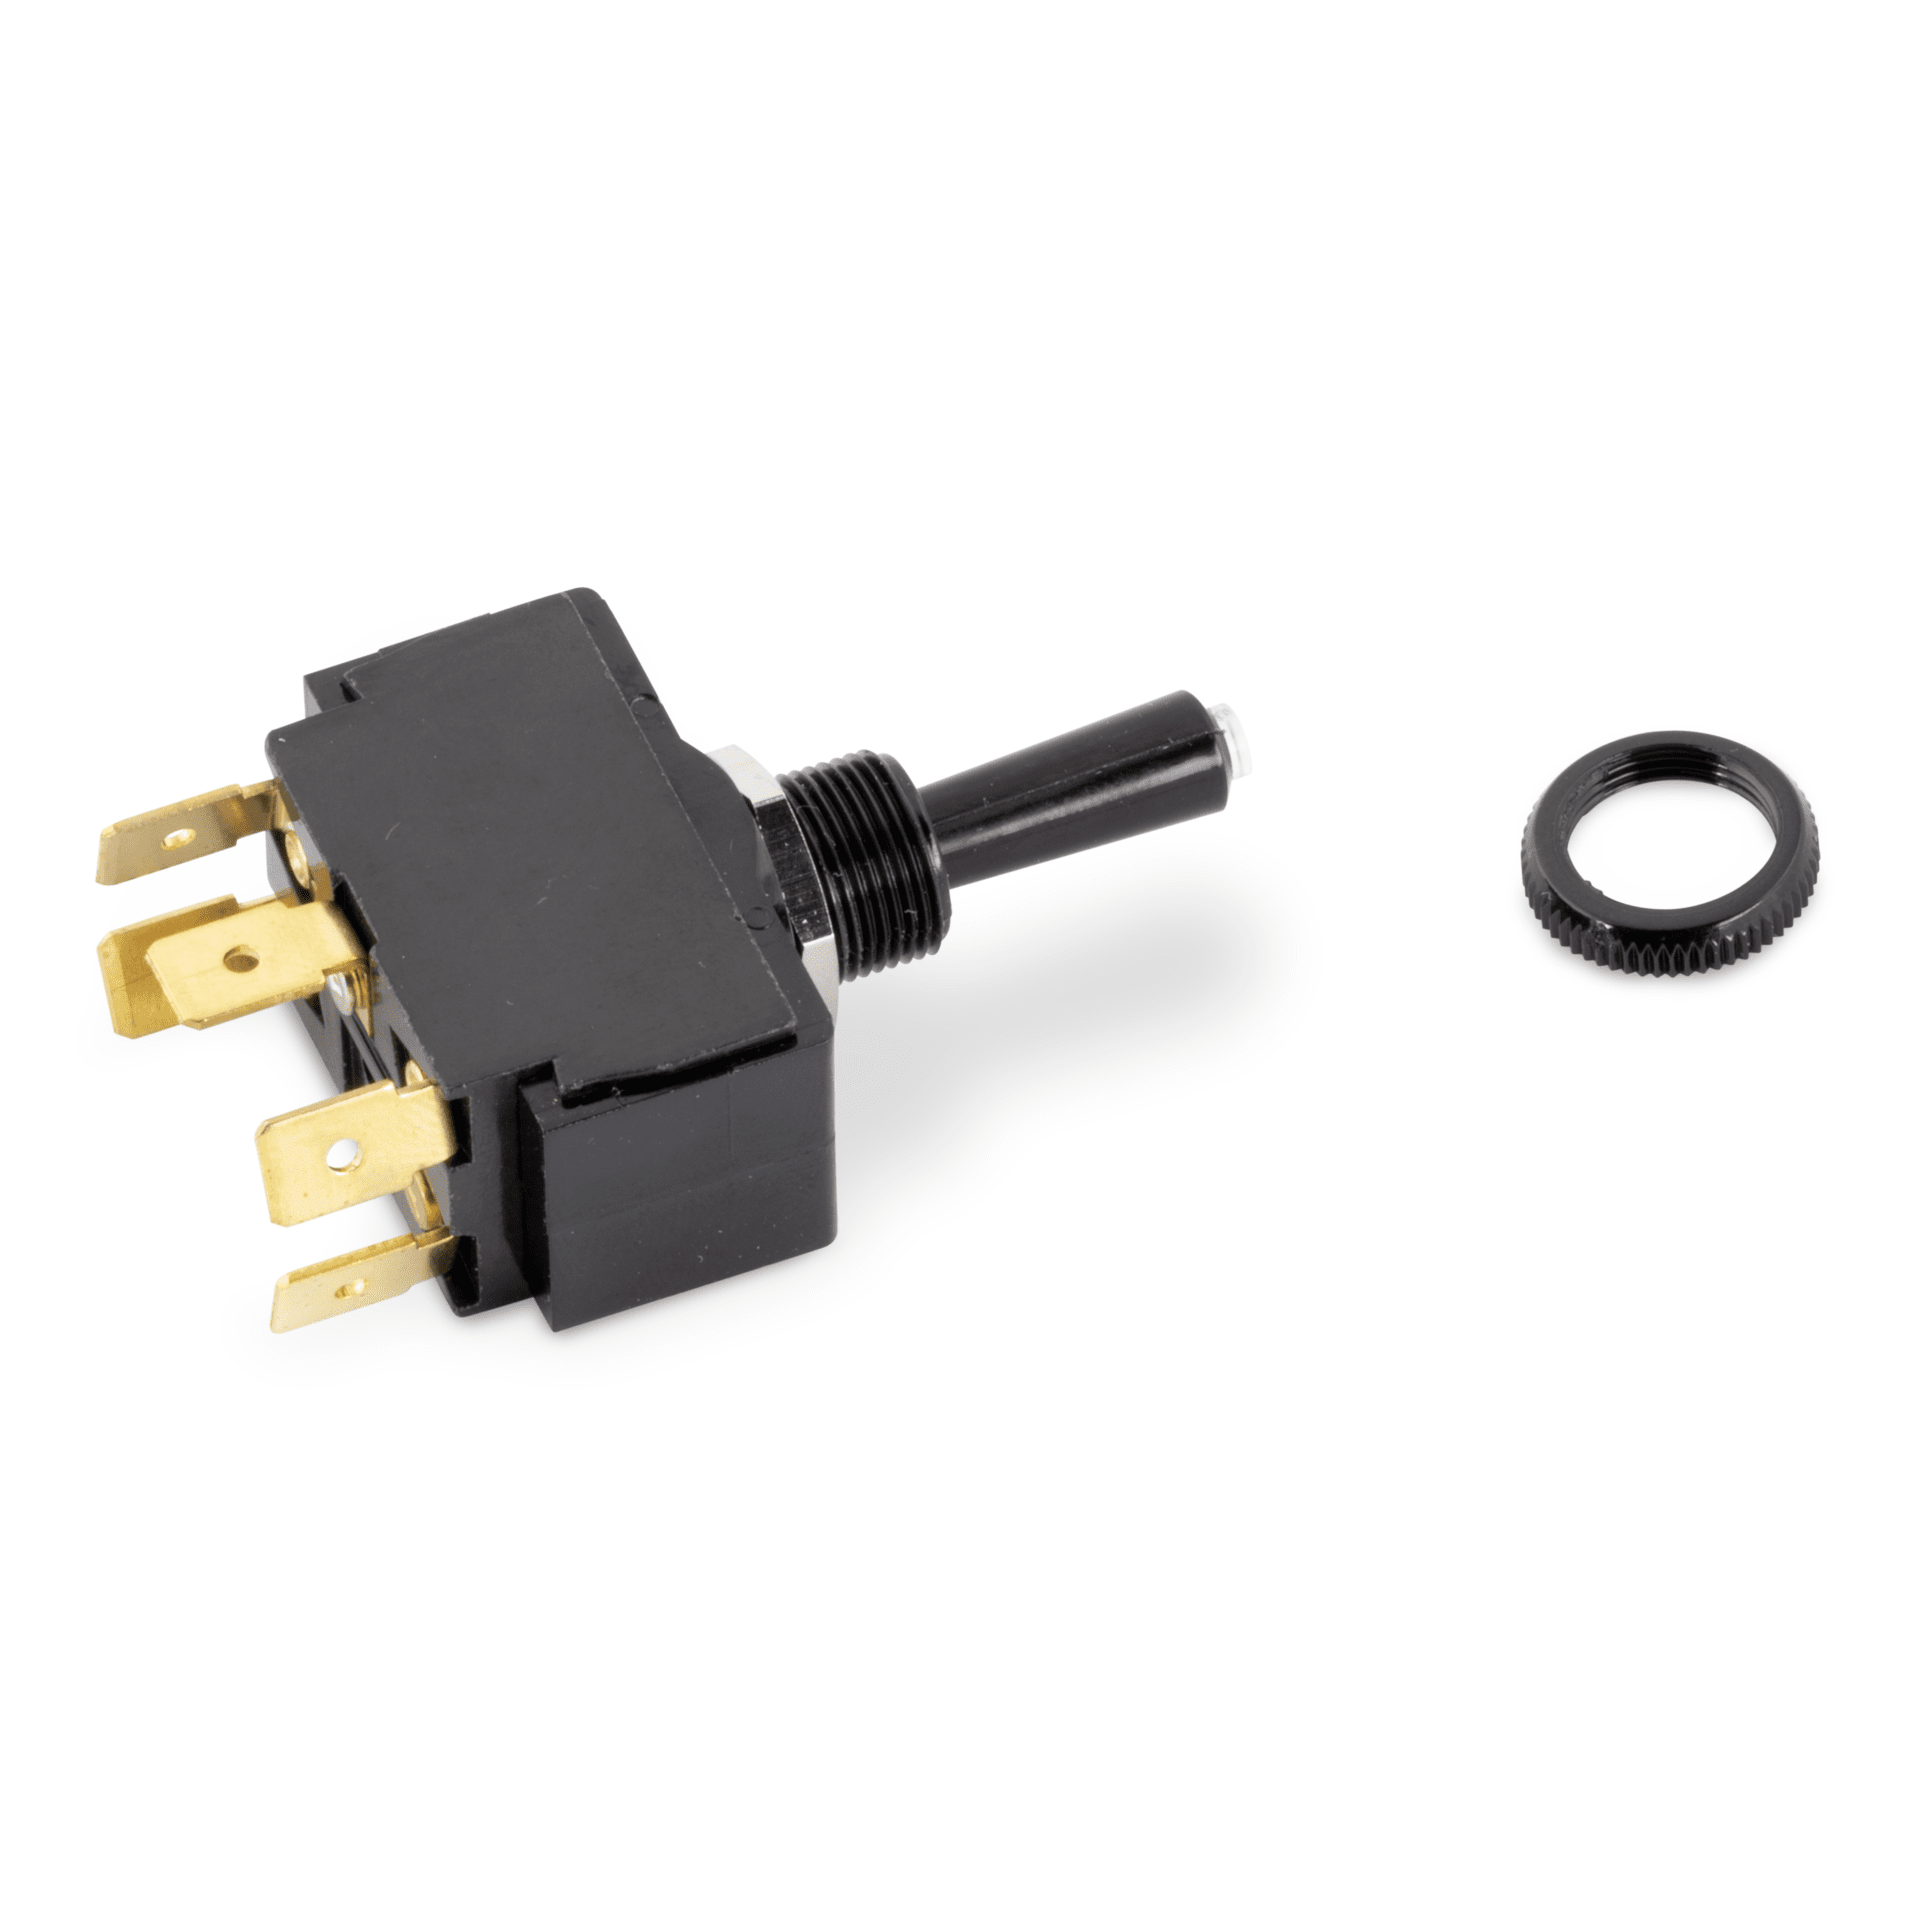 SWITCH-TOGGLE OFF SPDT Sierra TG23040 ON ON